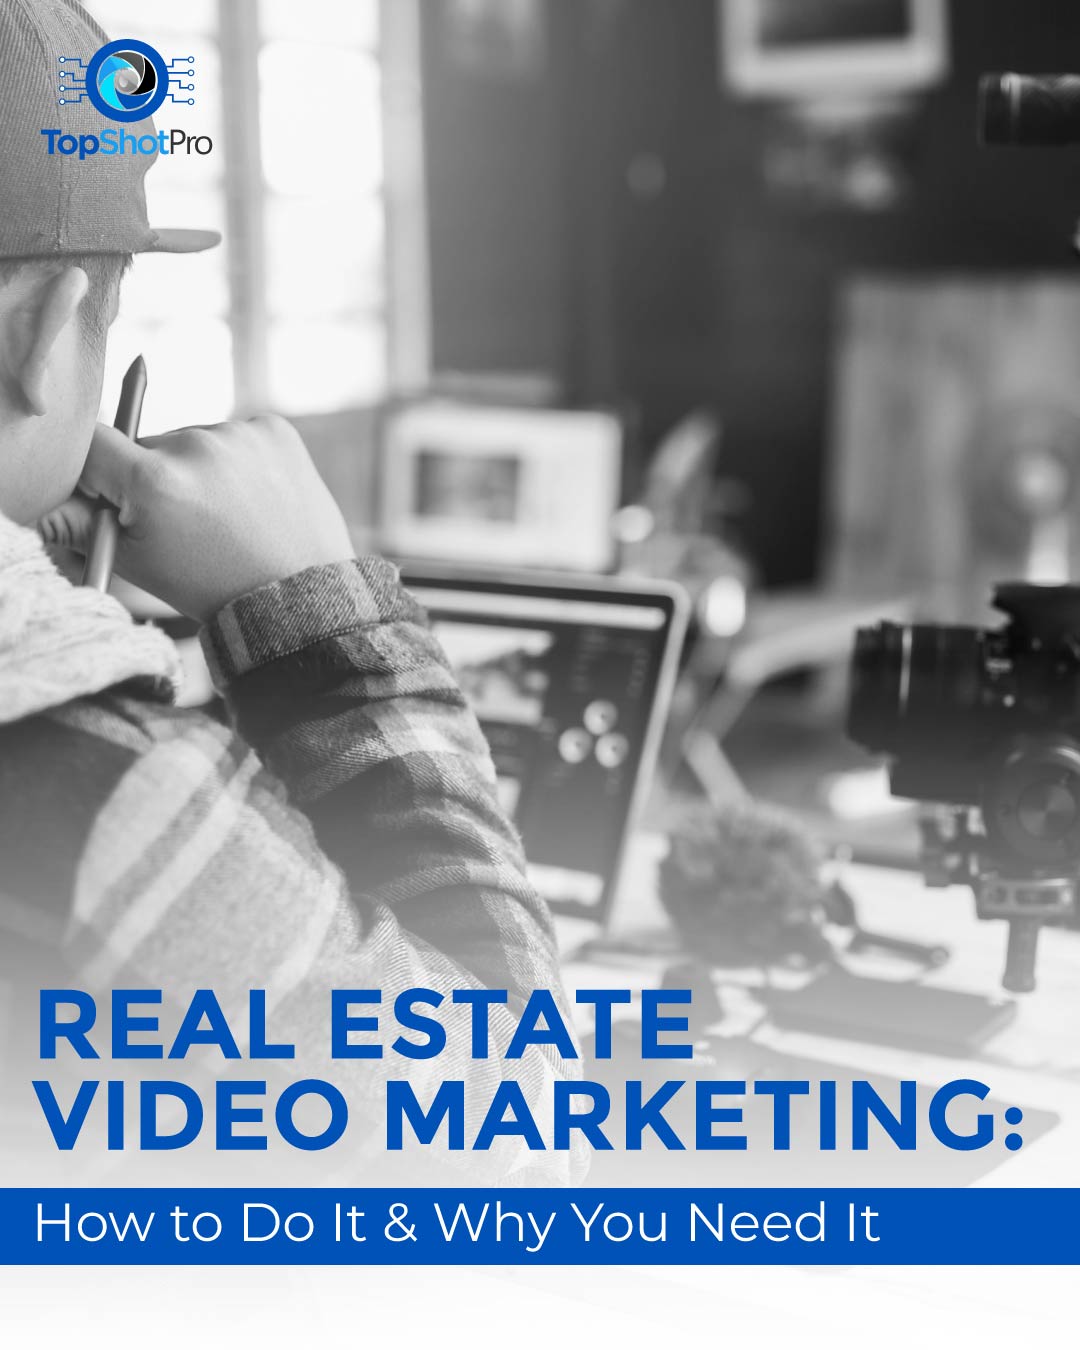 Real Estate Video Marketing: How to Do It & Why You Need It